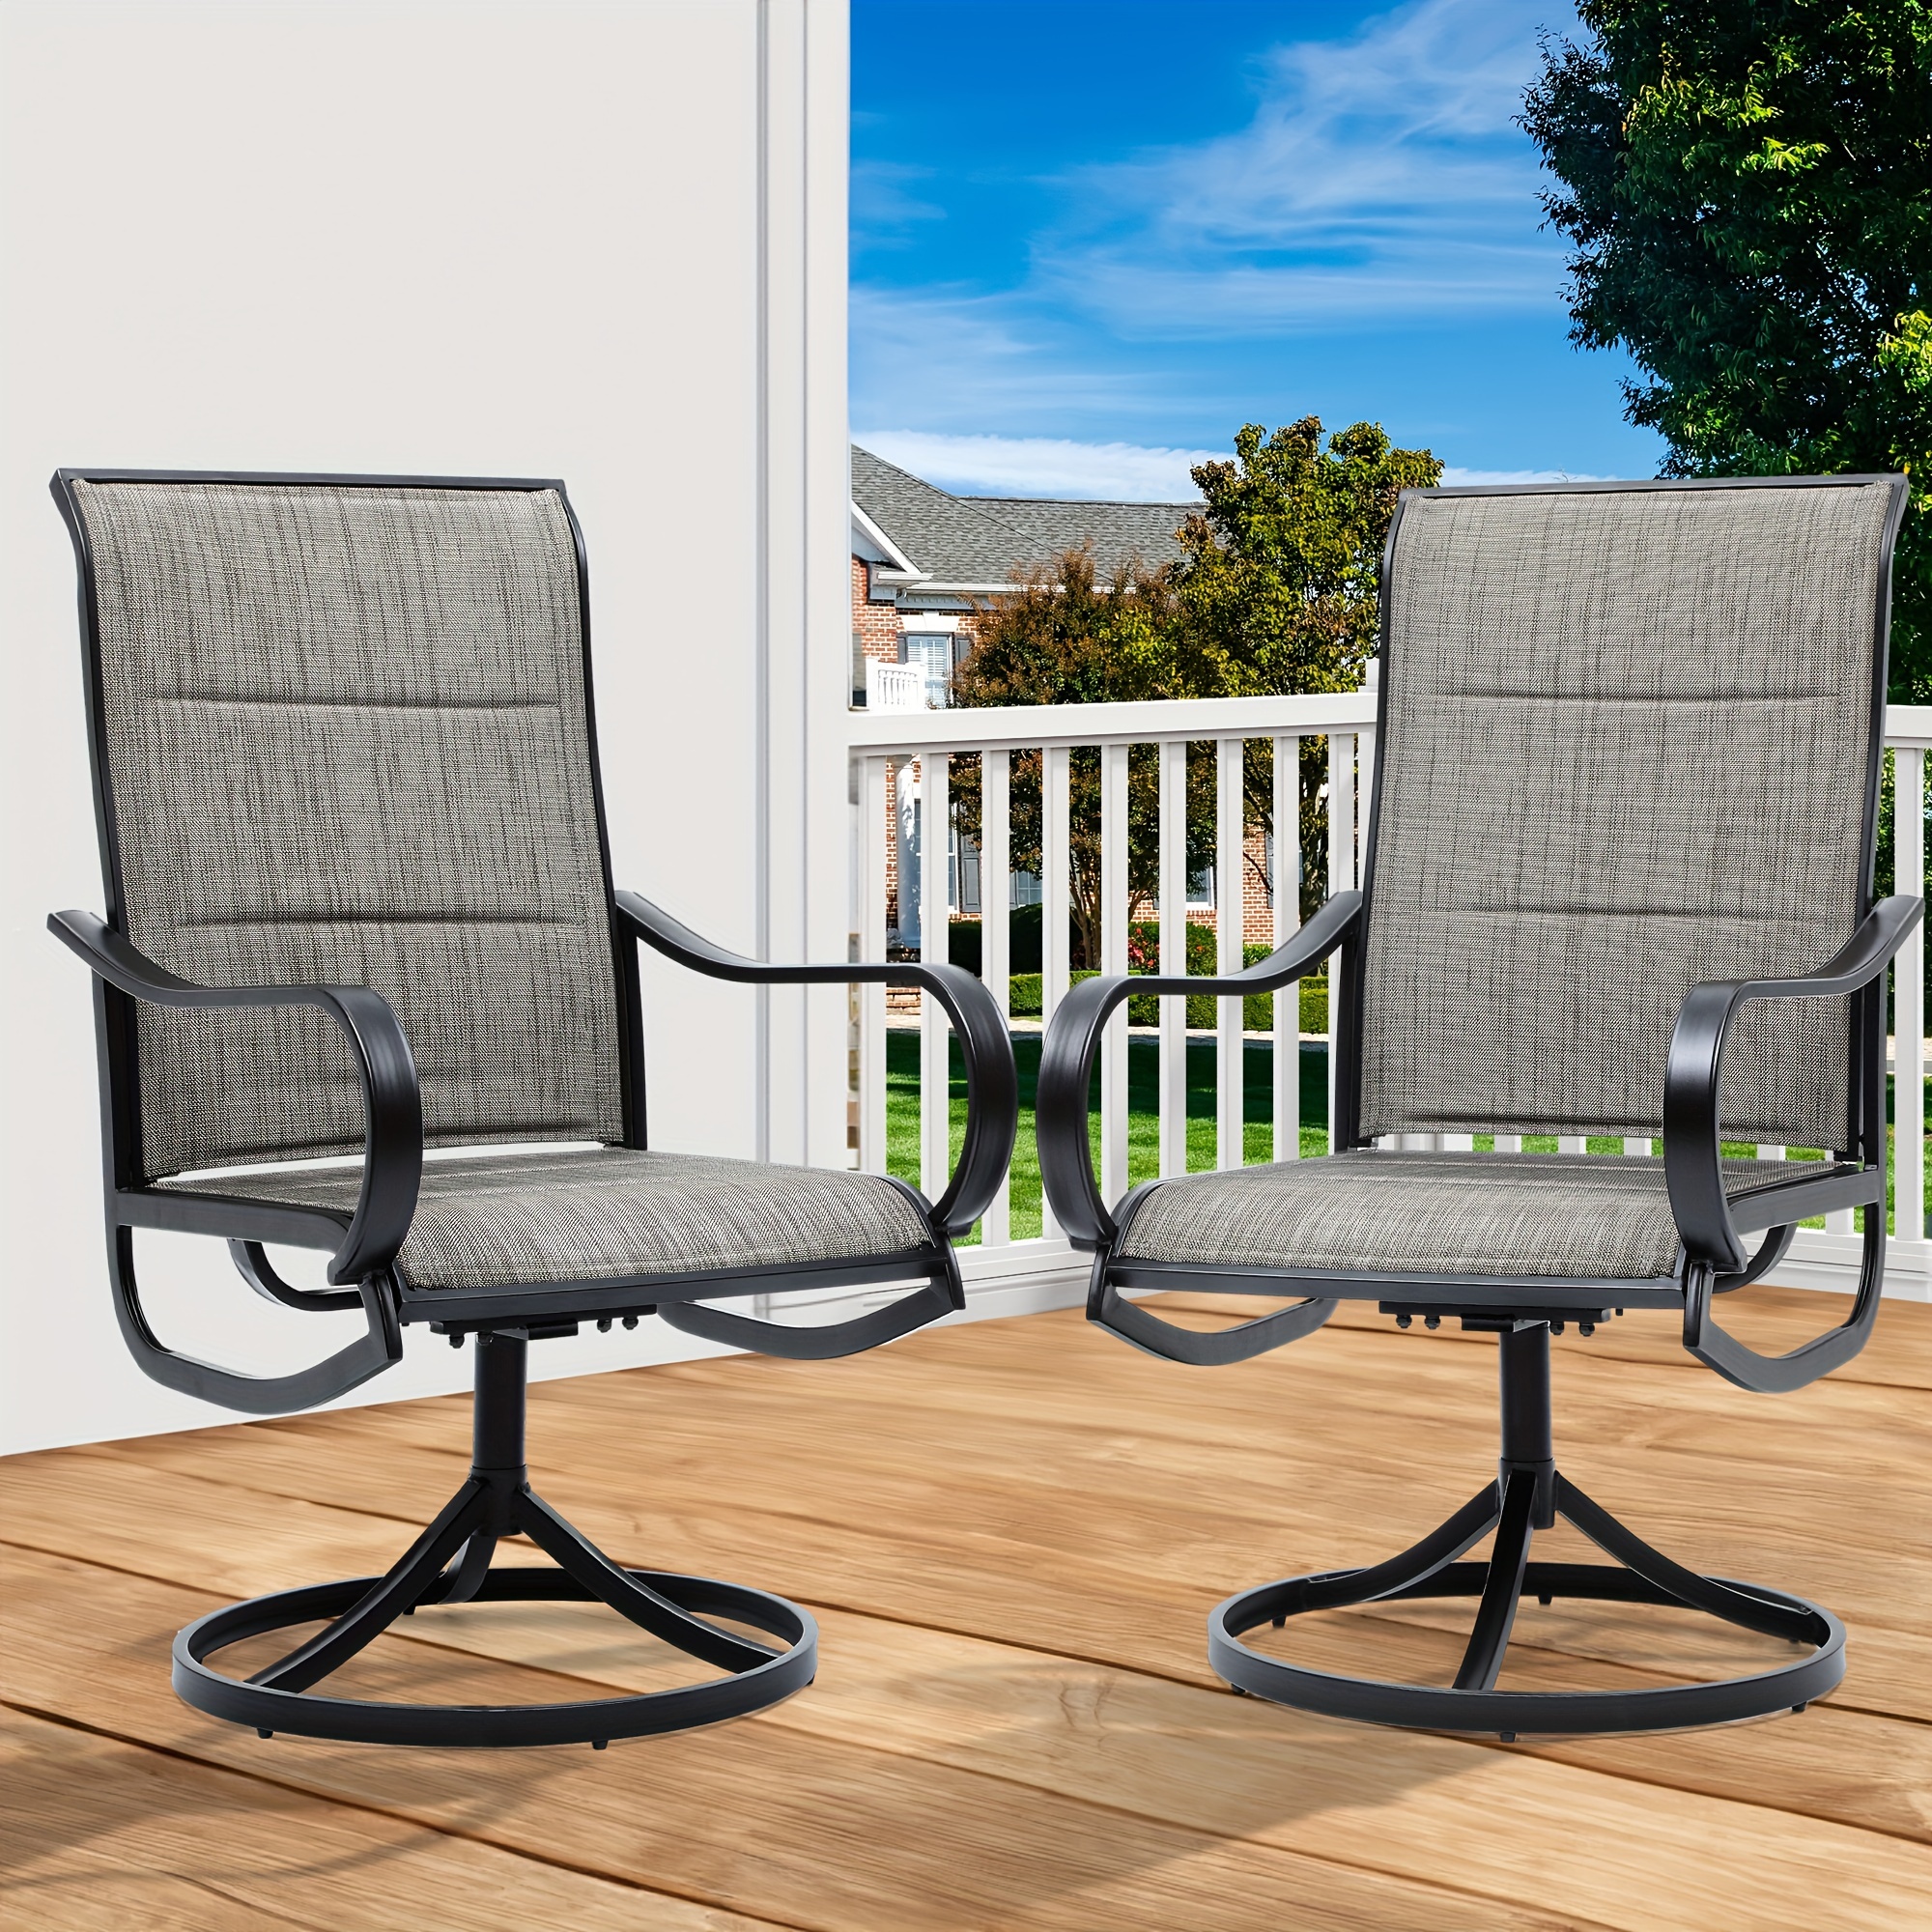 

Dwvo Padded Swivel Patio Chairs Set Of 2, Textile Swivel Outdoor Chairs Set W/heavy Duty Metal Frame, All Weather Patio Swivel Chairs Set Ideal For Backyard Deck Garden & Indoors, Brown